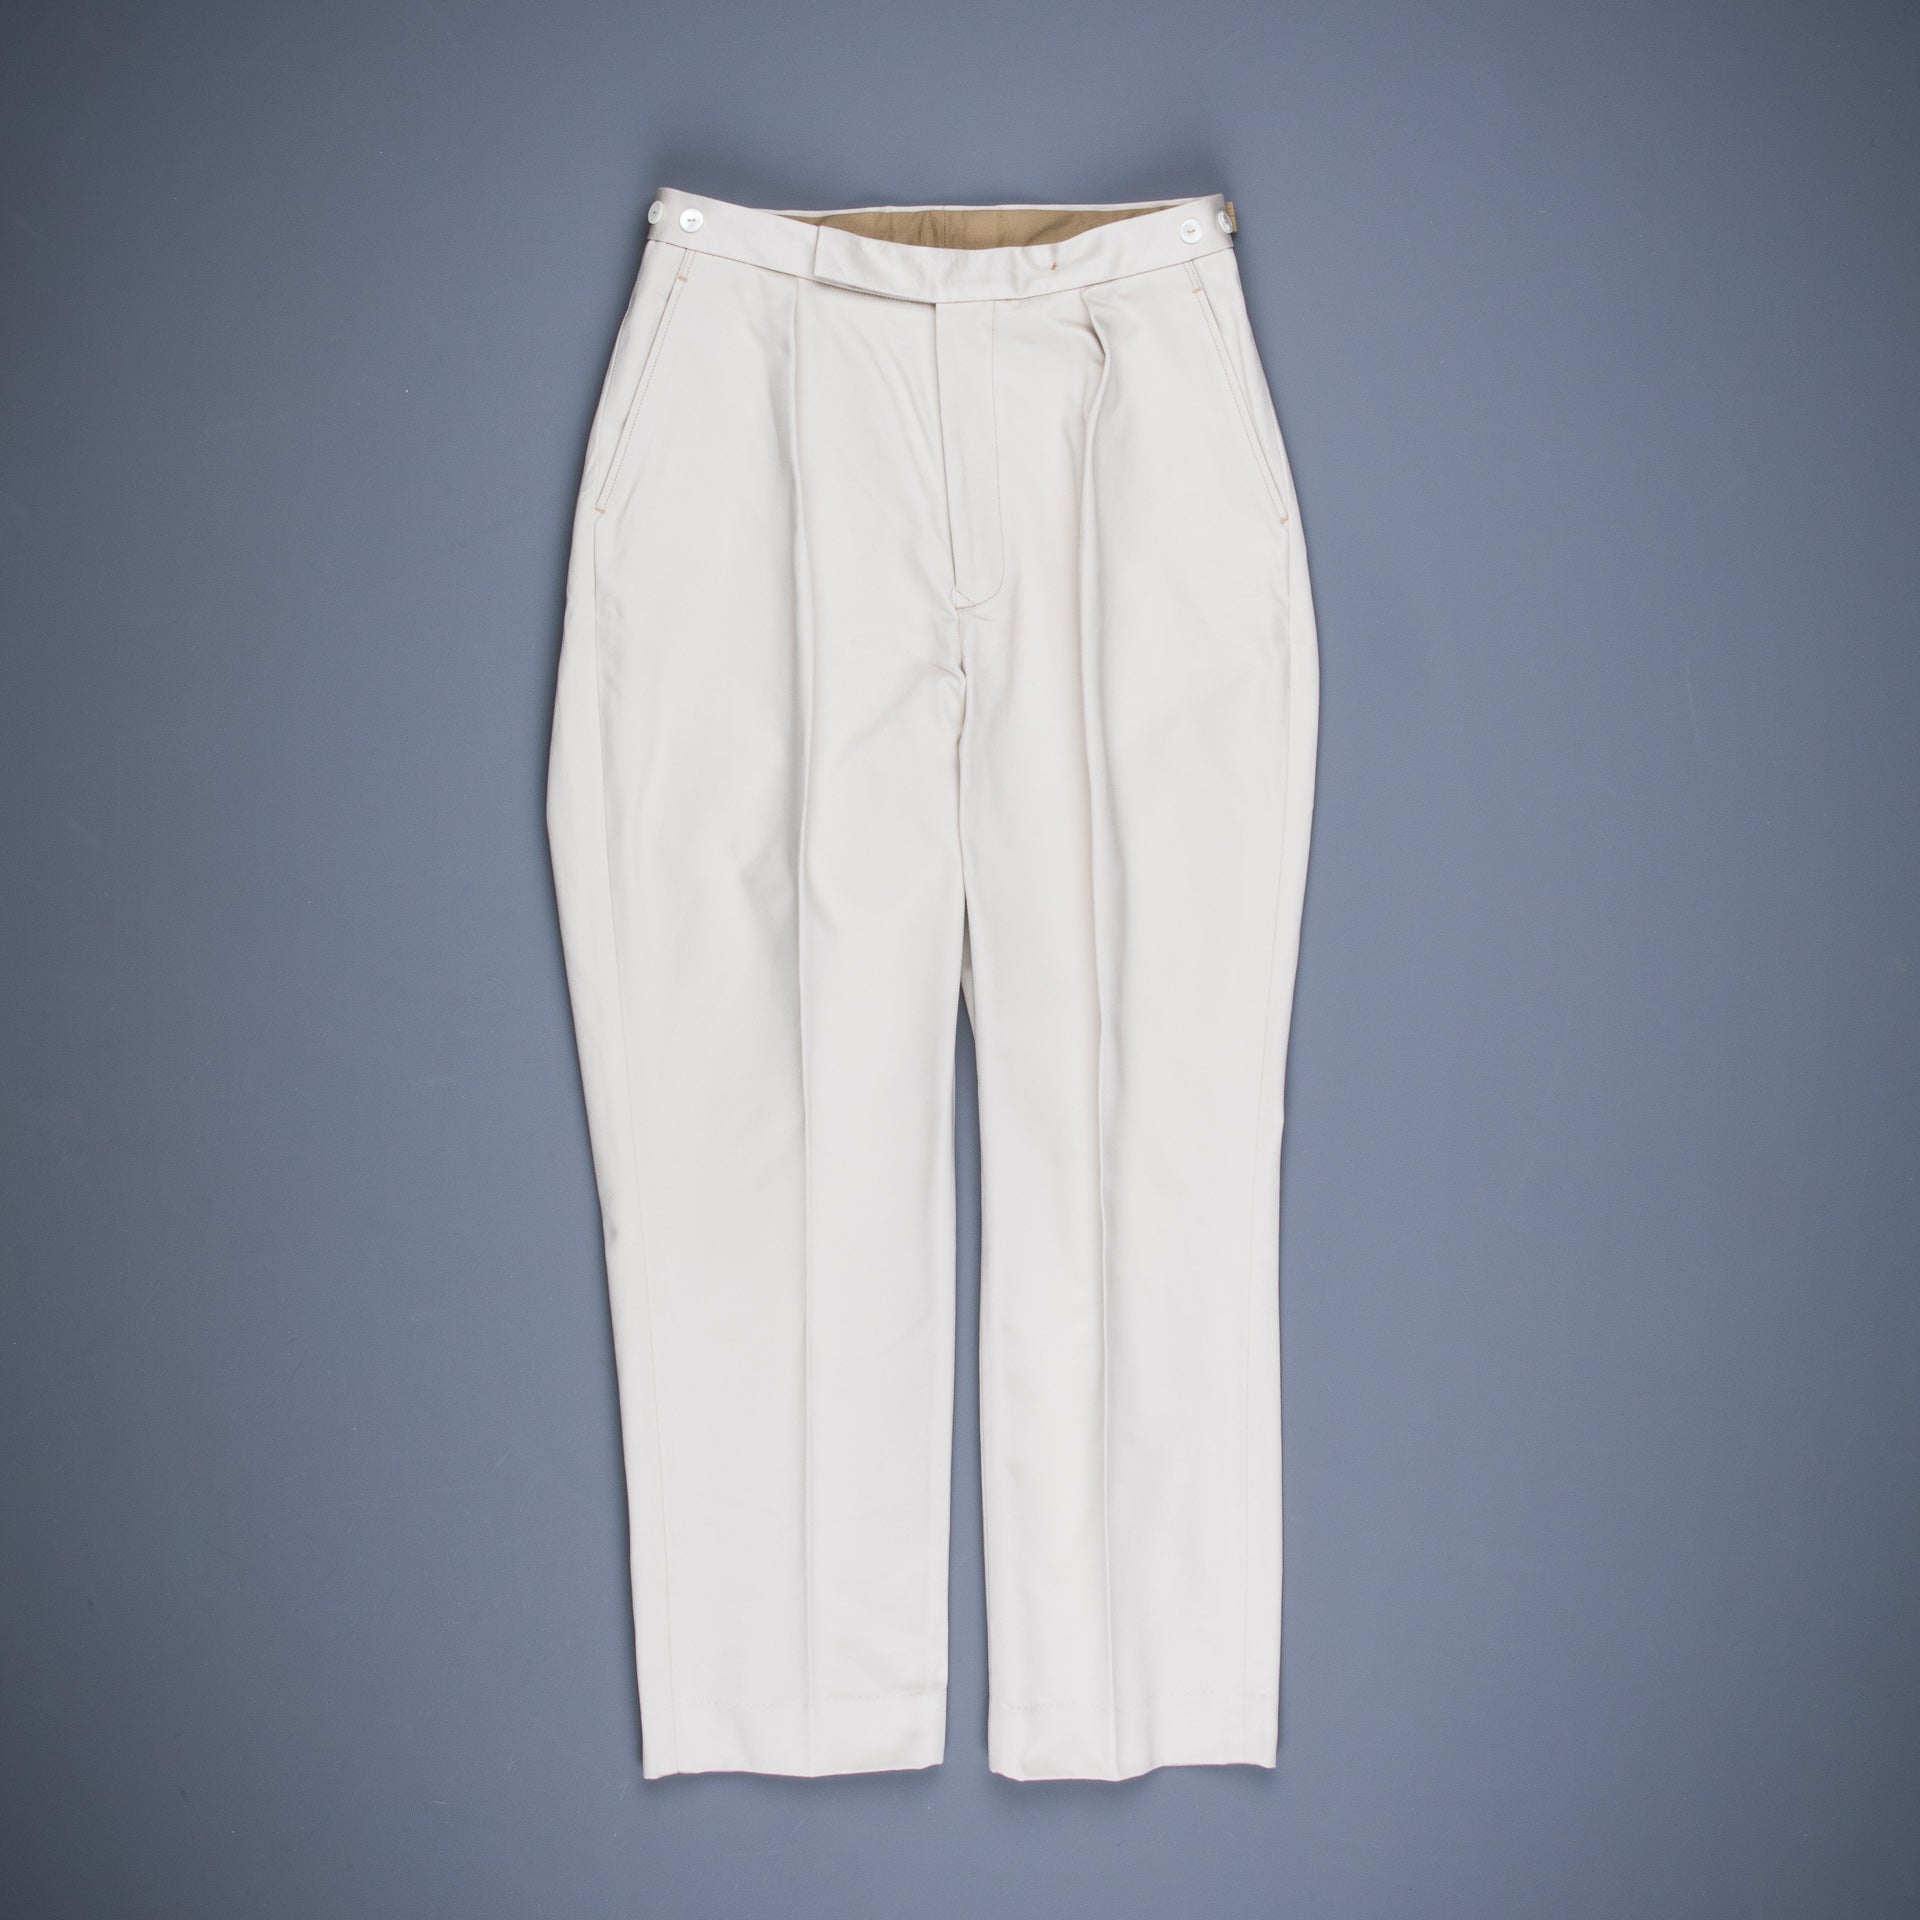 The Real McCoy's Joe McCoy 1950s Cotton Chino Trousers Beige